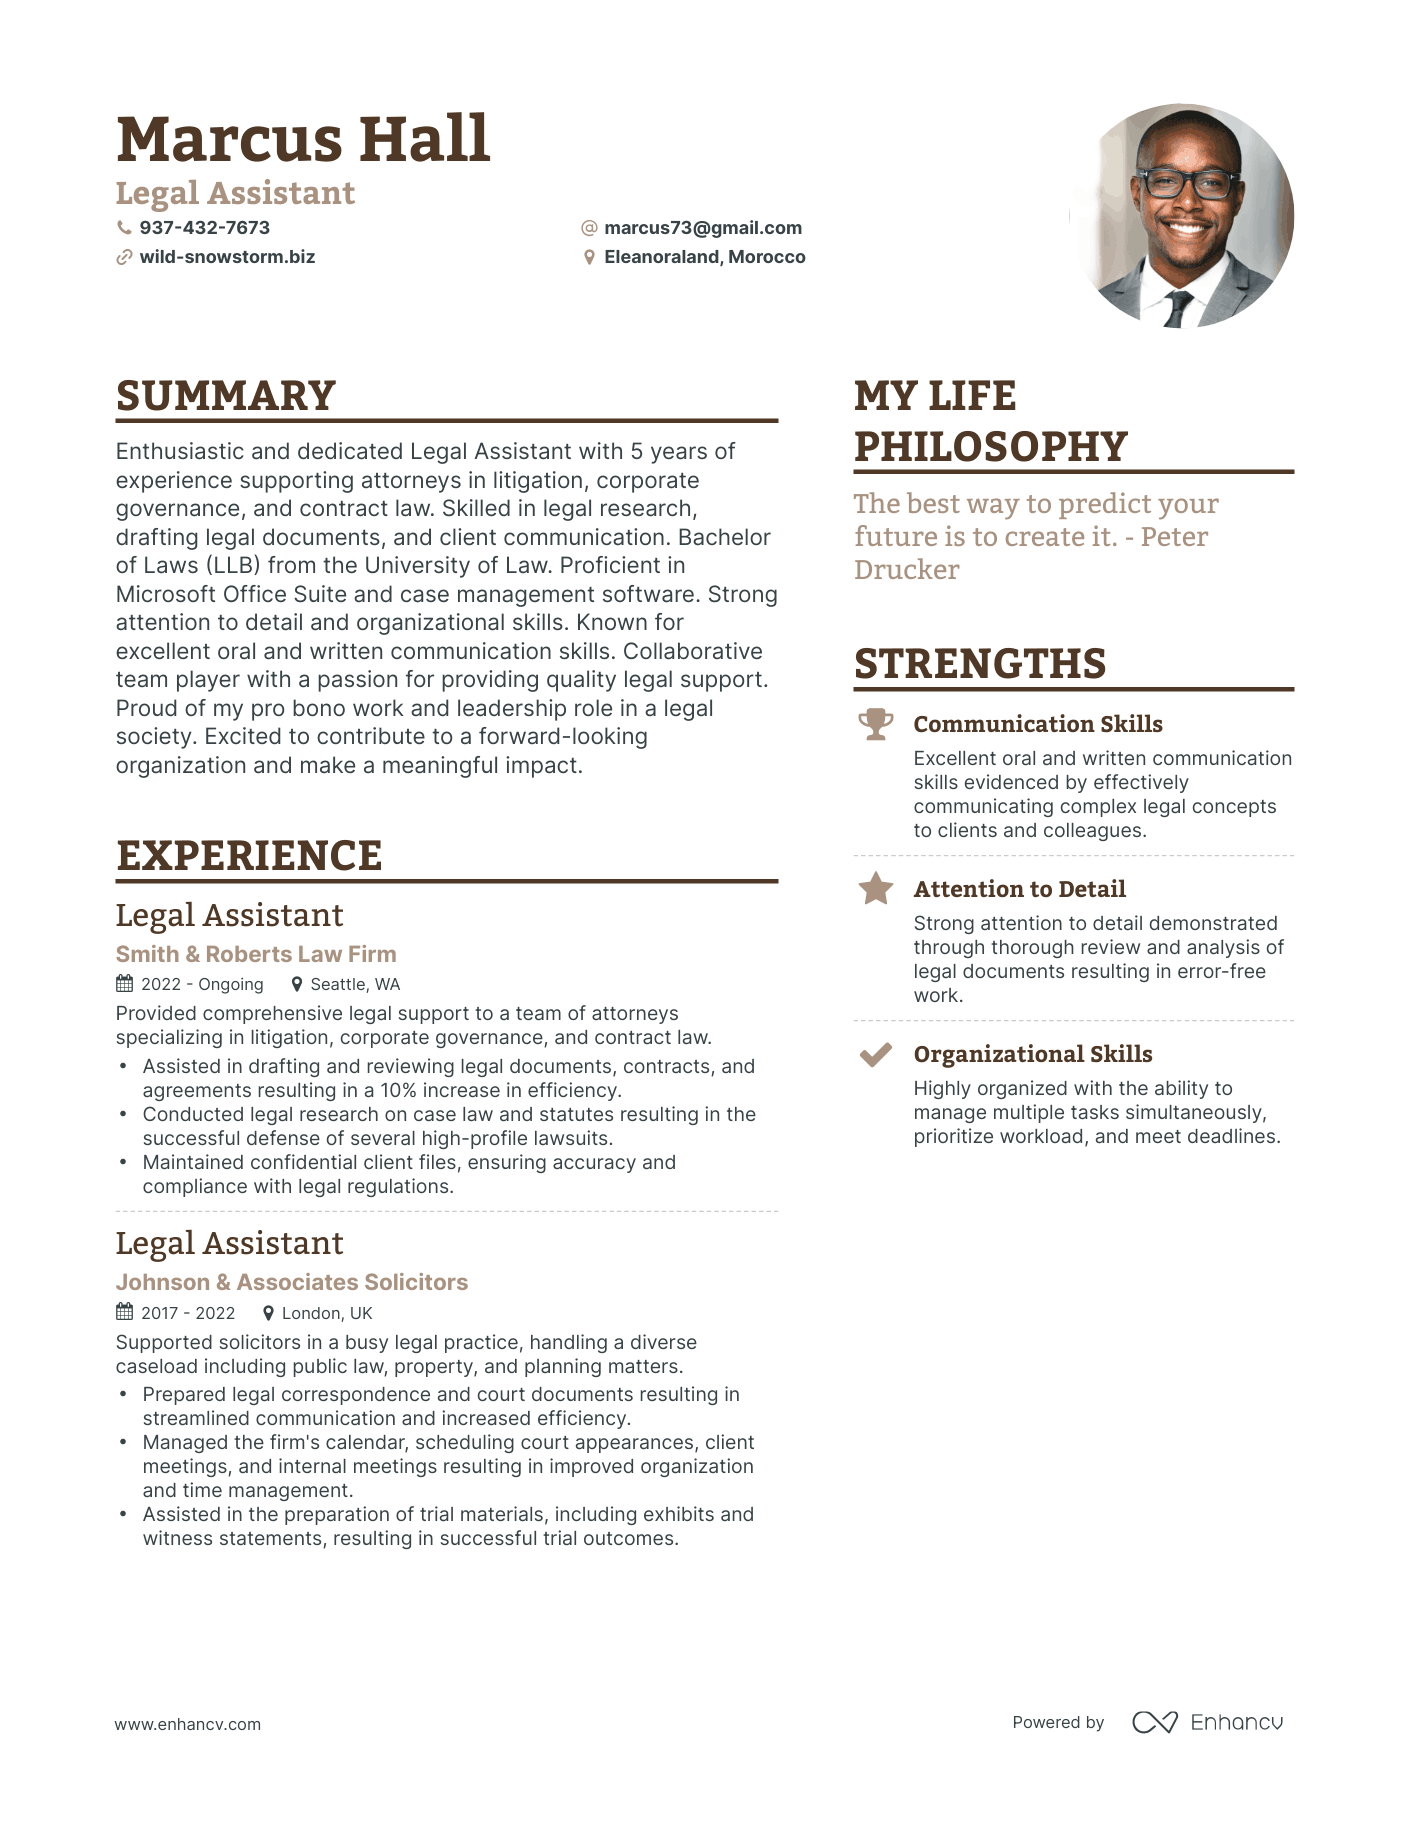 Legal Assistant resume example